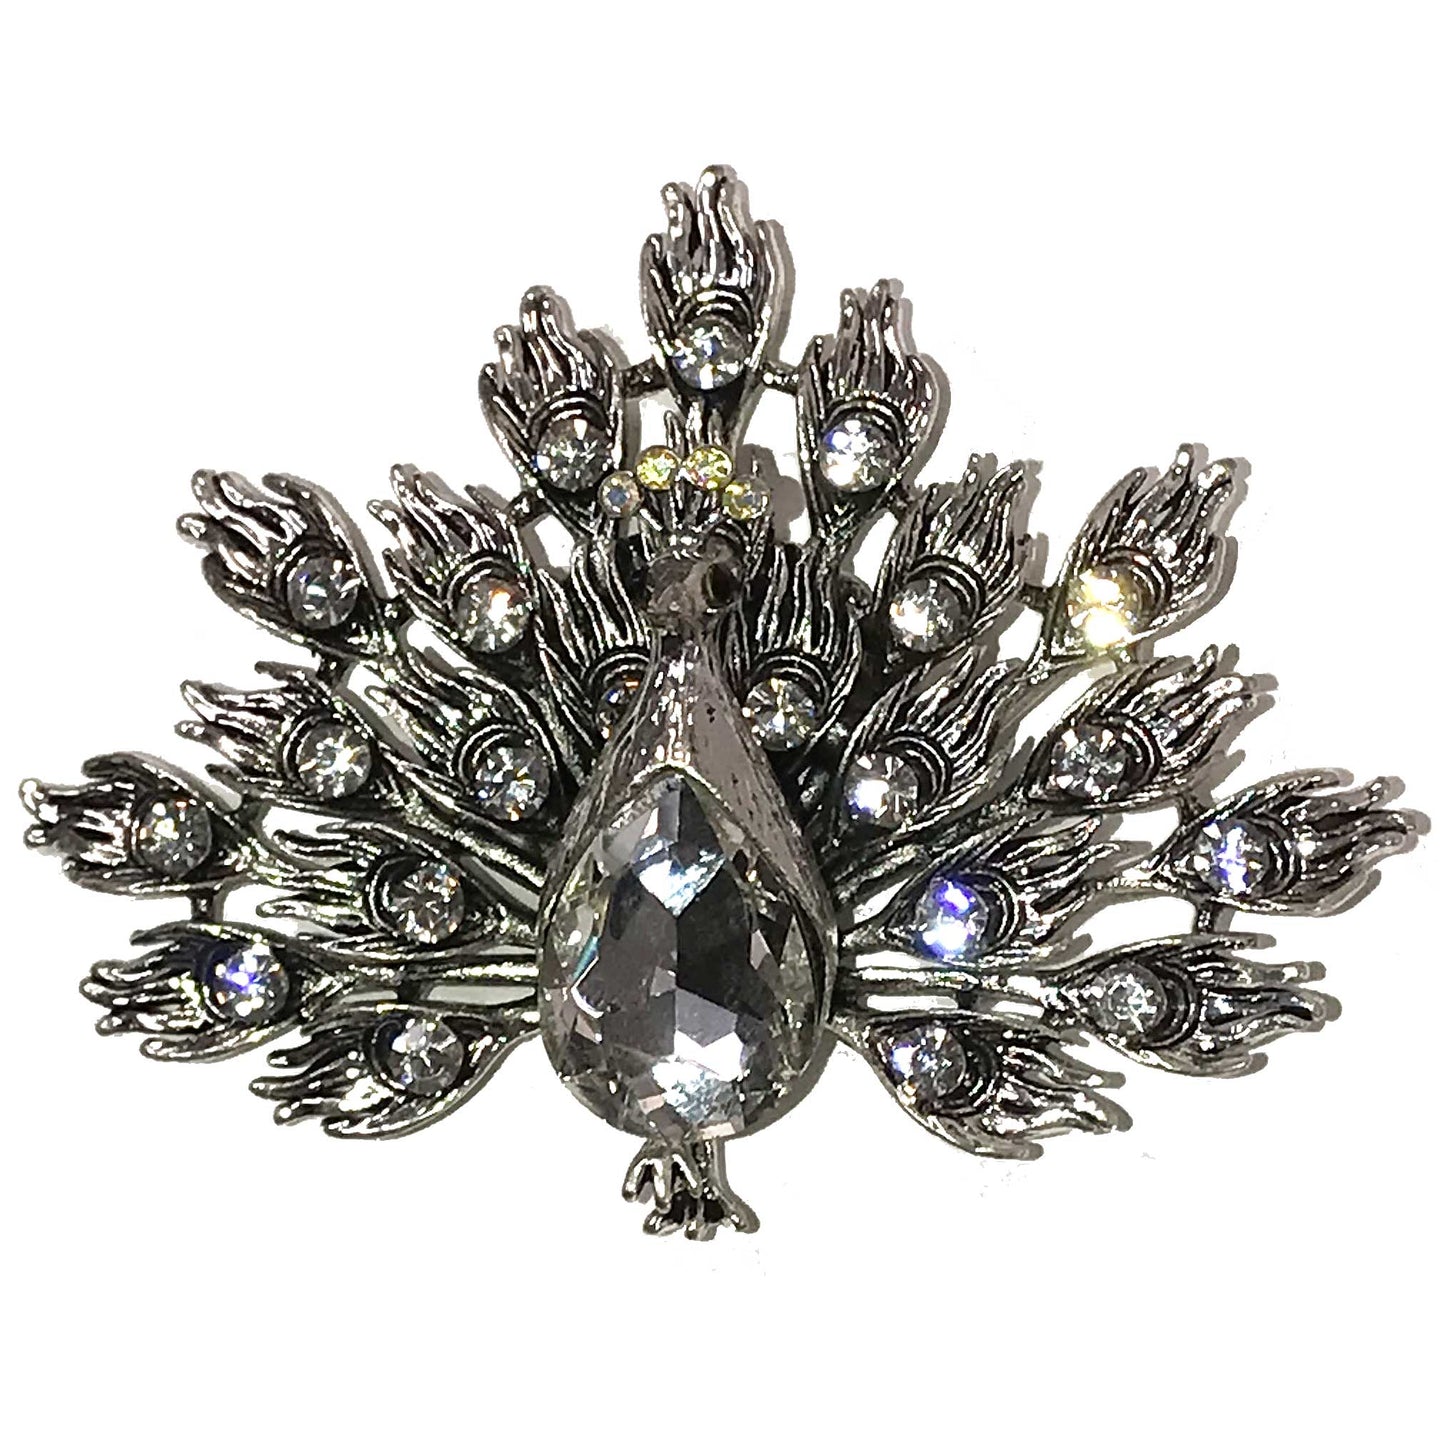 Crystal studded Peacock. Magnetic Brooch for Scarves Artistic Sculptural shapes add a personality to absolutely anything you wish to put your stamp on! The Super Strong Magnet is enough for a jacket lapel! Use to hold a sarong or cardigan together.  Great to adorn a hat or to hold a scarf in place with Fabric Safe Magnet.